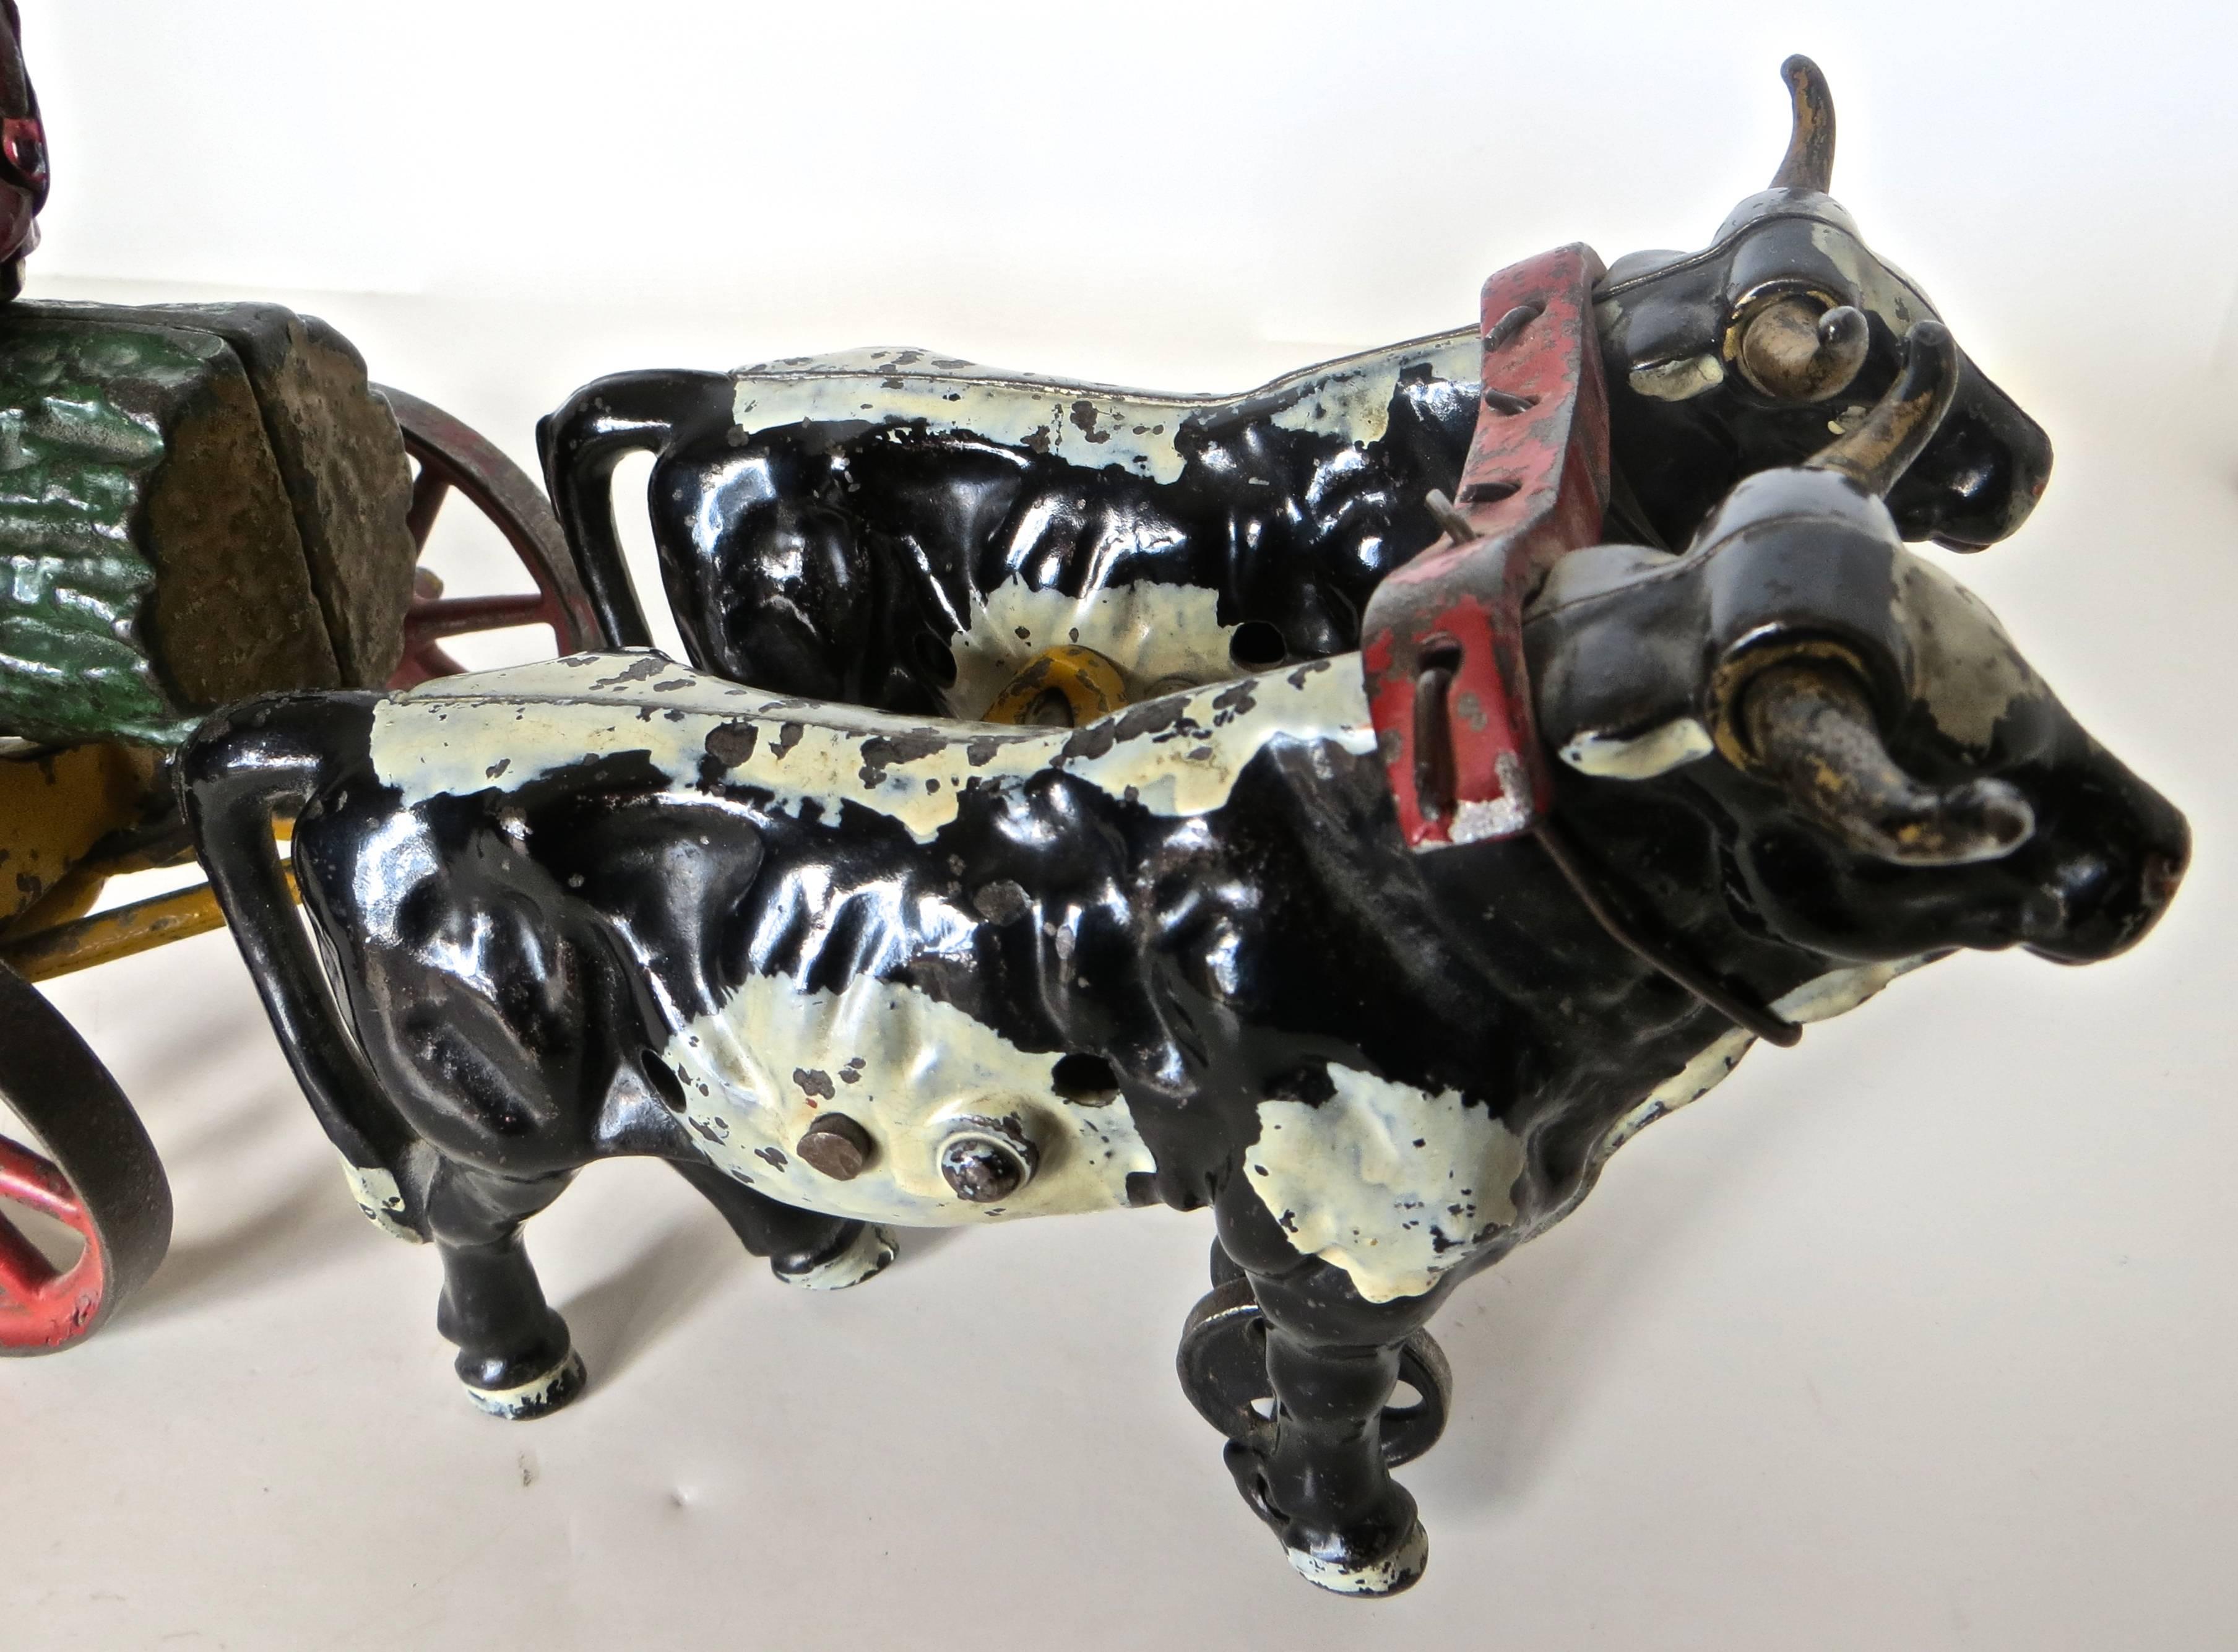 This charismatic turn of the century American cast iron floor toy (children rolled it around on the floor by hand) made by the Hubley Manufacturing Company in Lancaster, Pennsylvania, circa 1906 consists of: two oxen pulling a separate carriage with